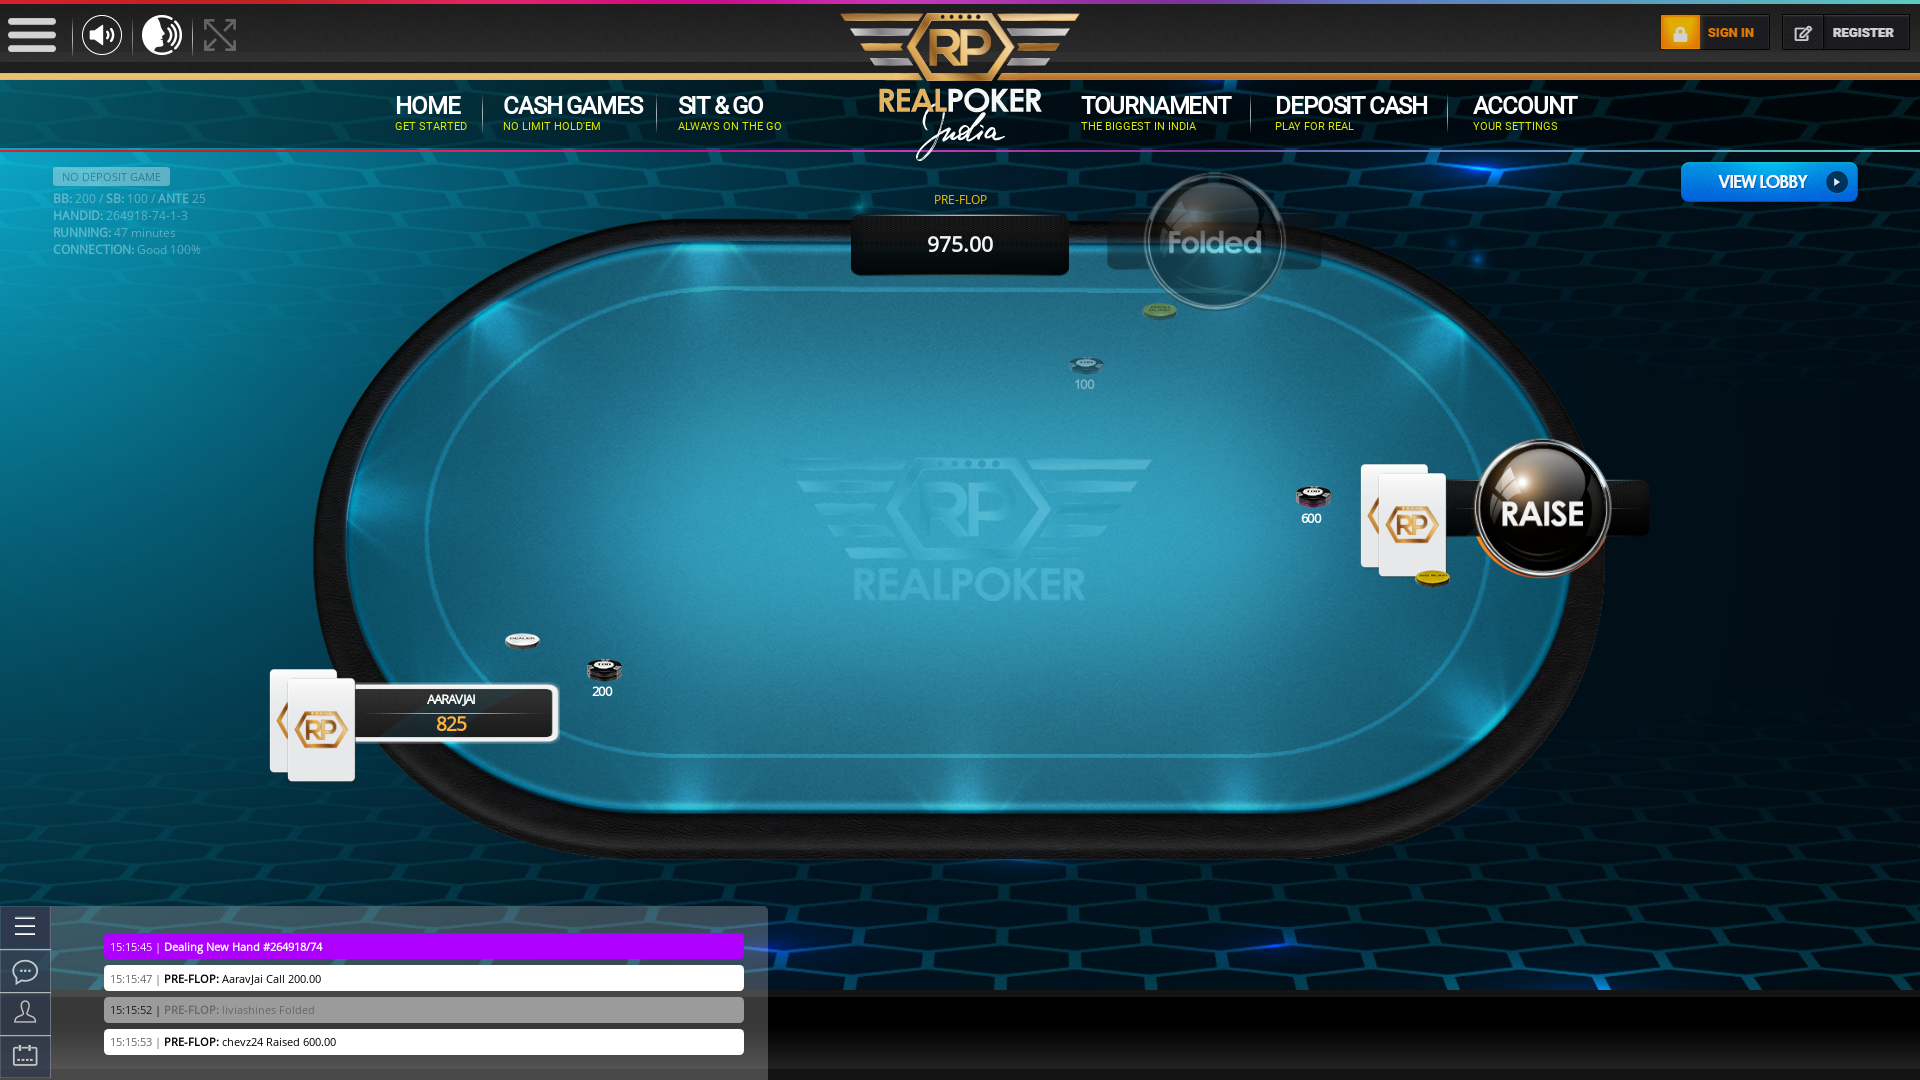 10 player texas holdem table at real poker with the table id 264918